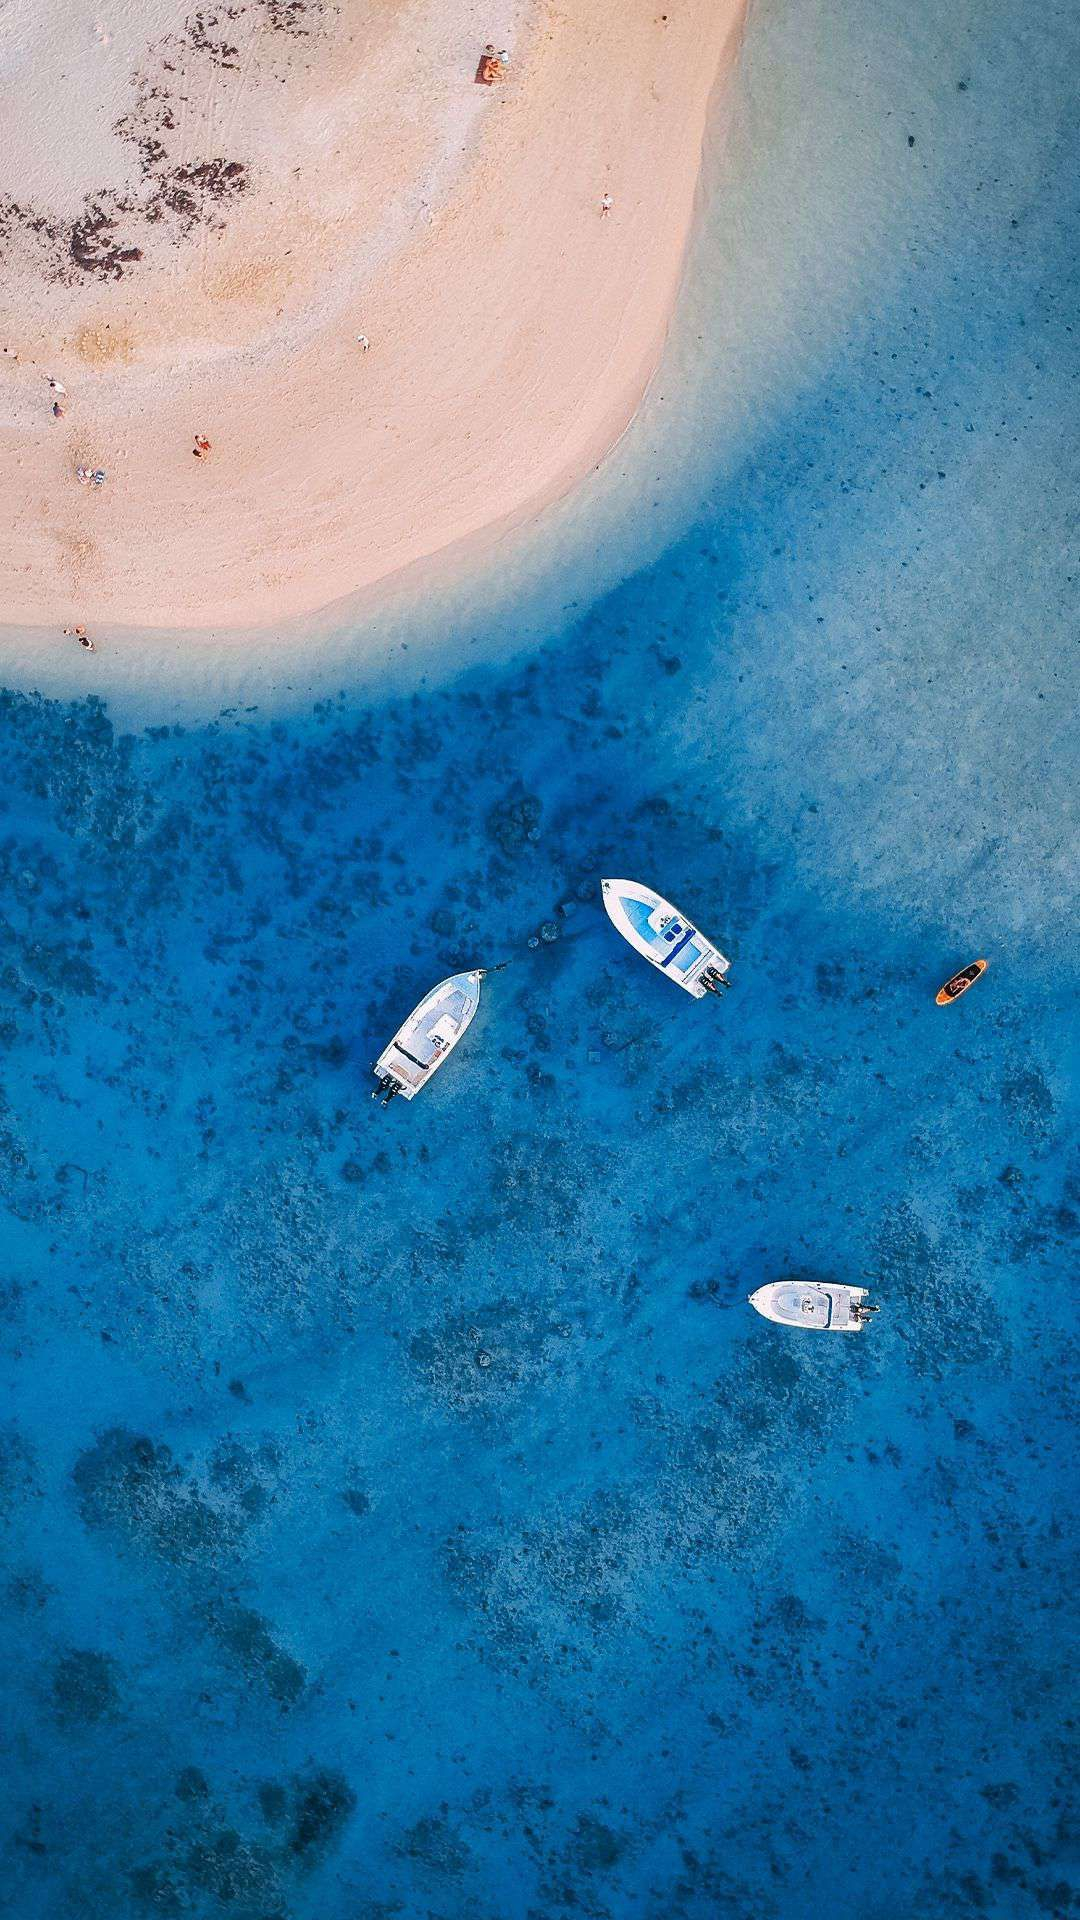 1080x1920 Beach People Boats Aerial View iPhone Wallpaper | Boat wallpaper, Beach wallpaper iphone, Beach wallpaper